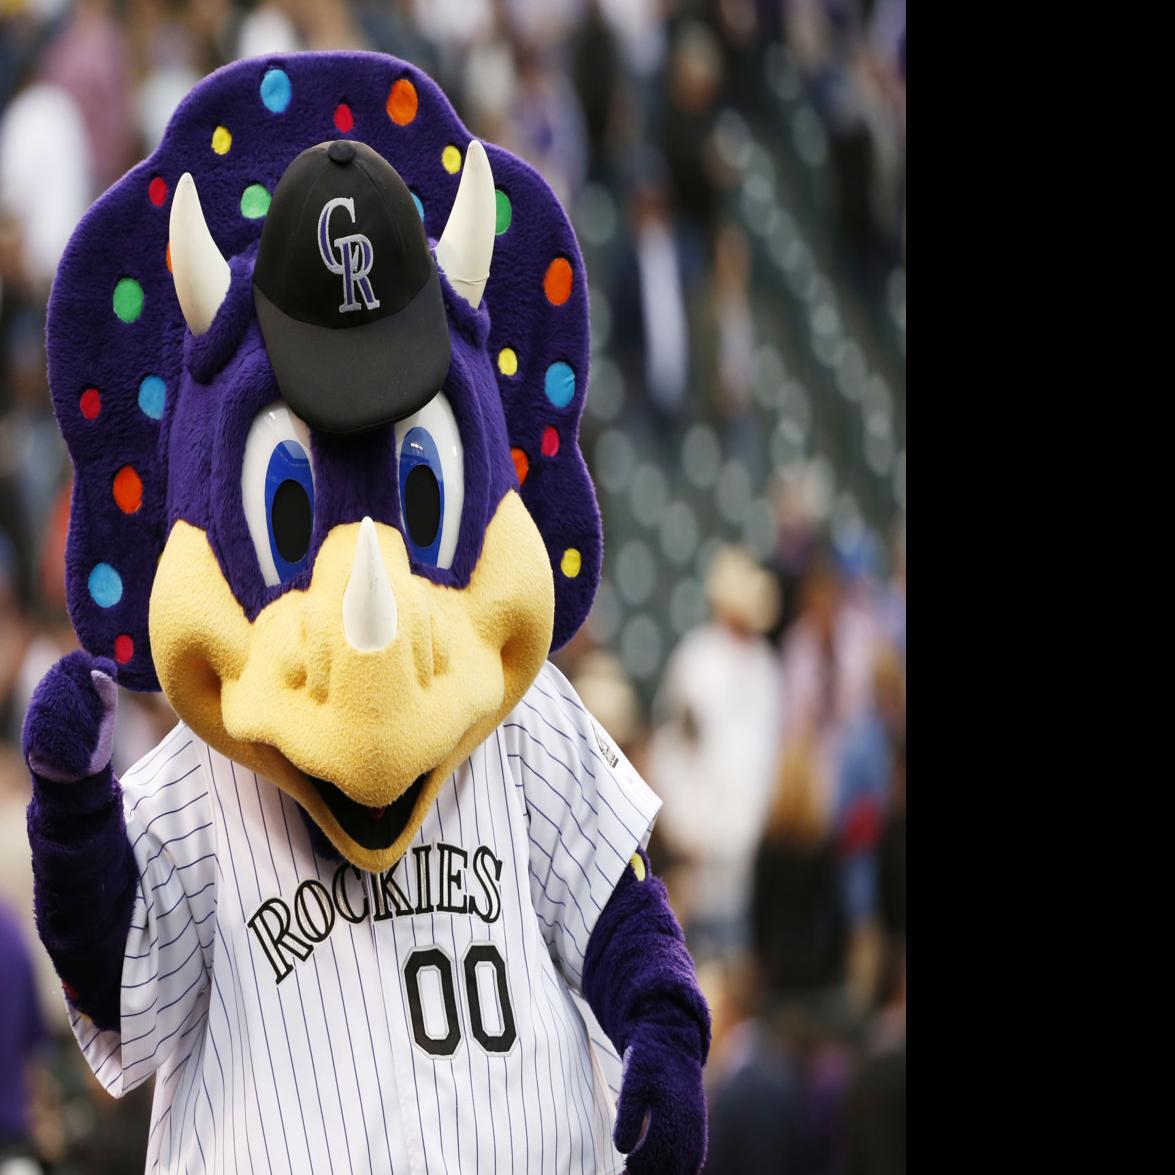 Blame Dinger: Rockies conclude fan was shouting name of mascot, not racial  slur, Sports